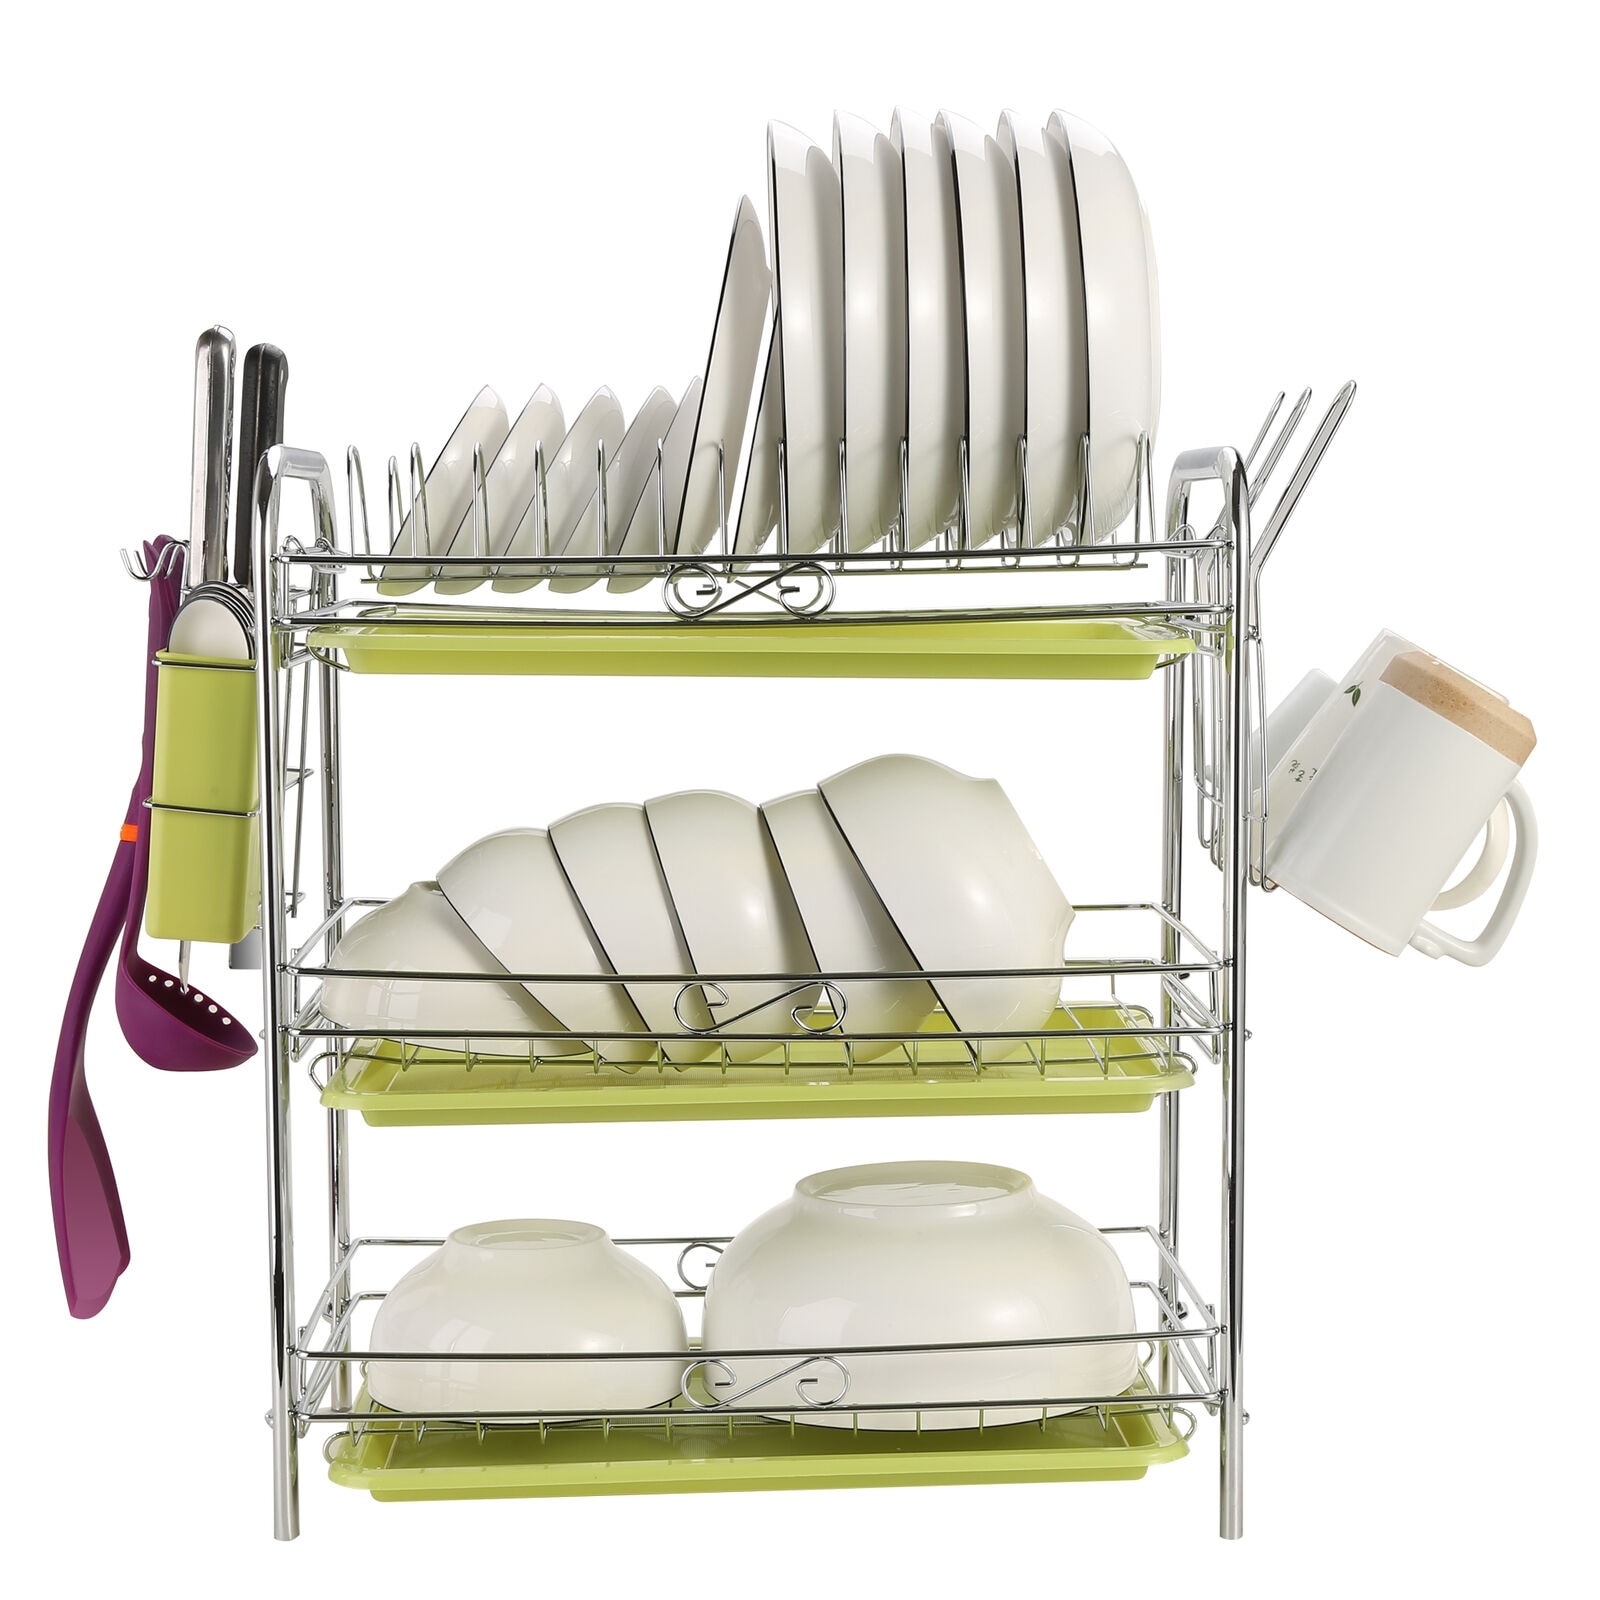 https://ak1.ostkcdn.com/images/products/is/images/direct/572f79e024569e04ce3def35b8df7cc0c9d8d69a/3-Level-Chrome-Dish-Drying-Rack-Kitchen-Dish-Drainer-Storage-with-Draining-Board-and-Cutlery-Cup-22.04-x-9.05-x-18.50-IN.jpg